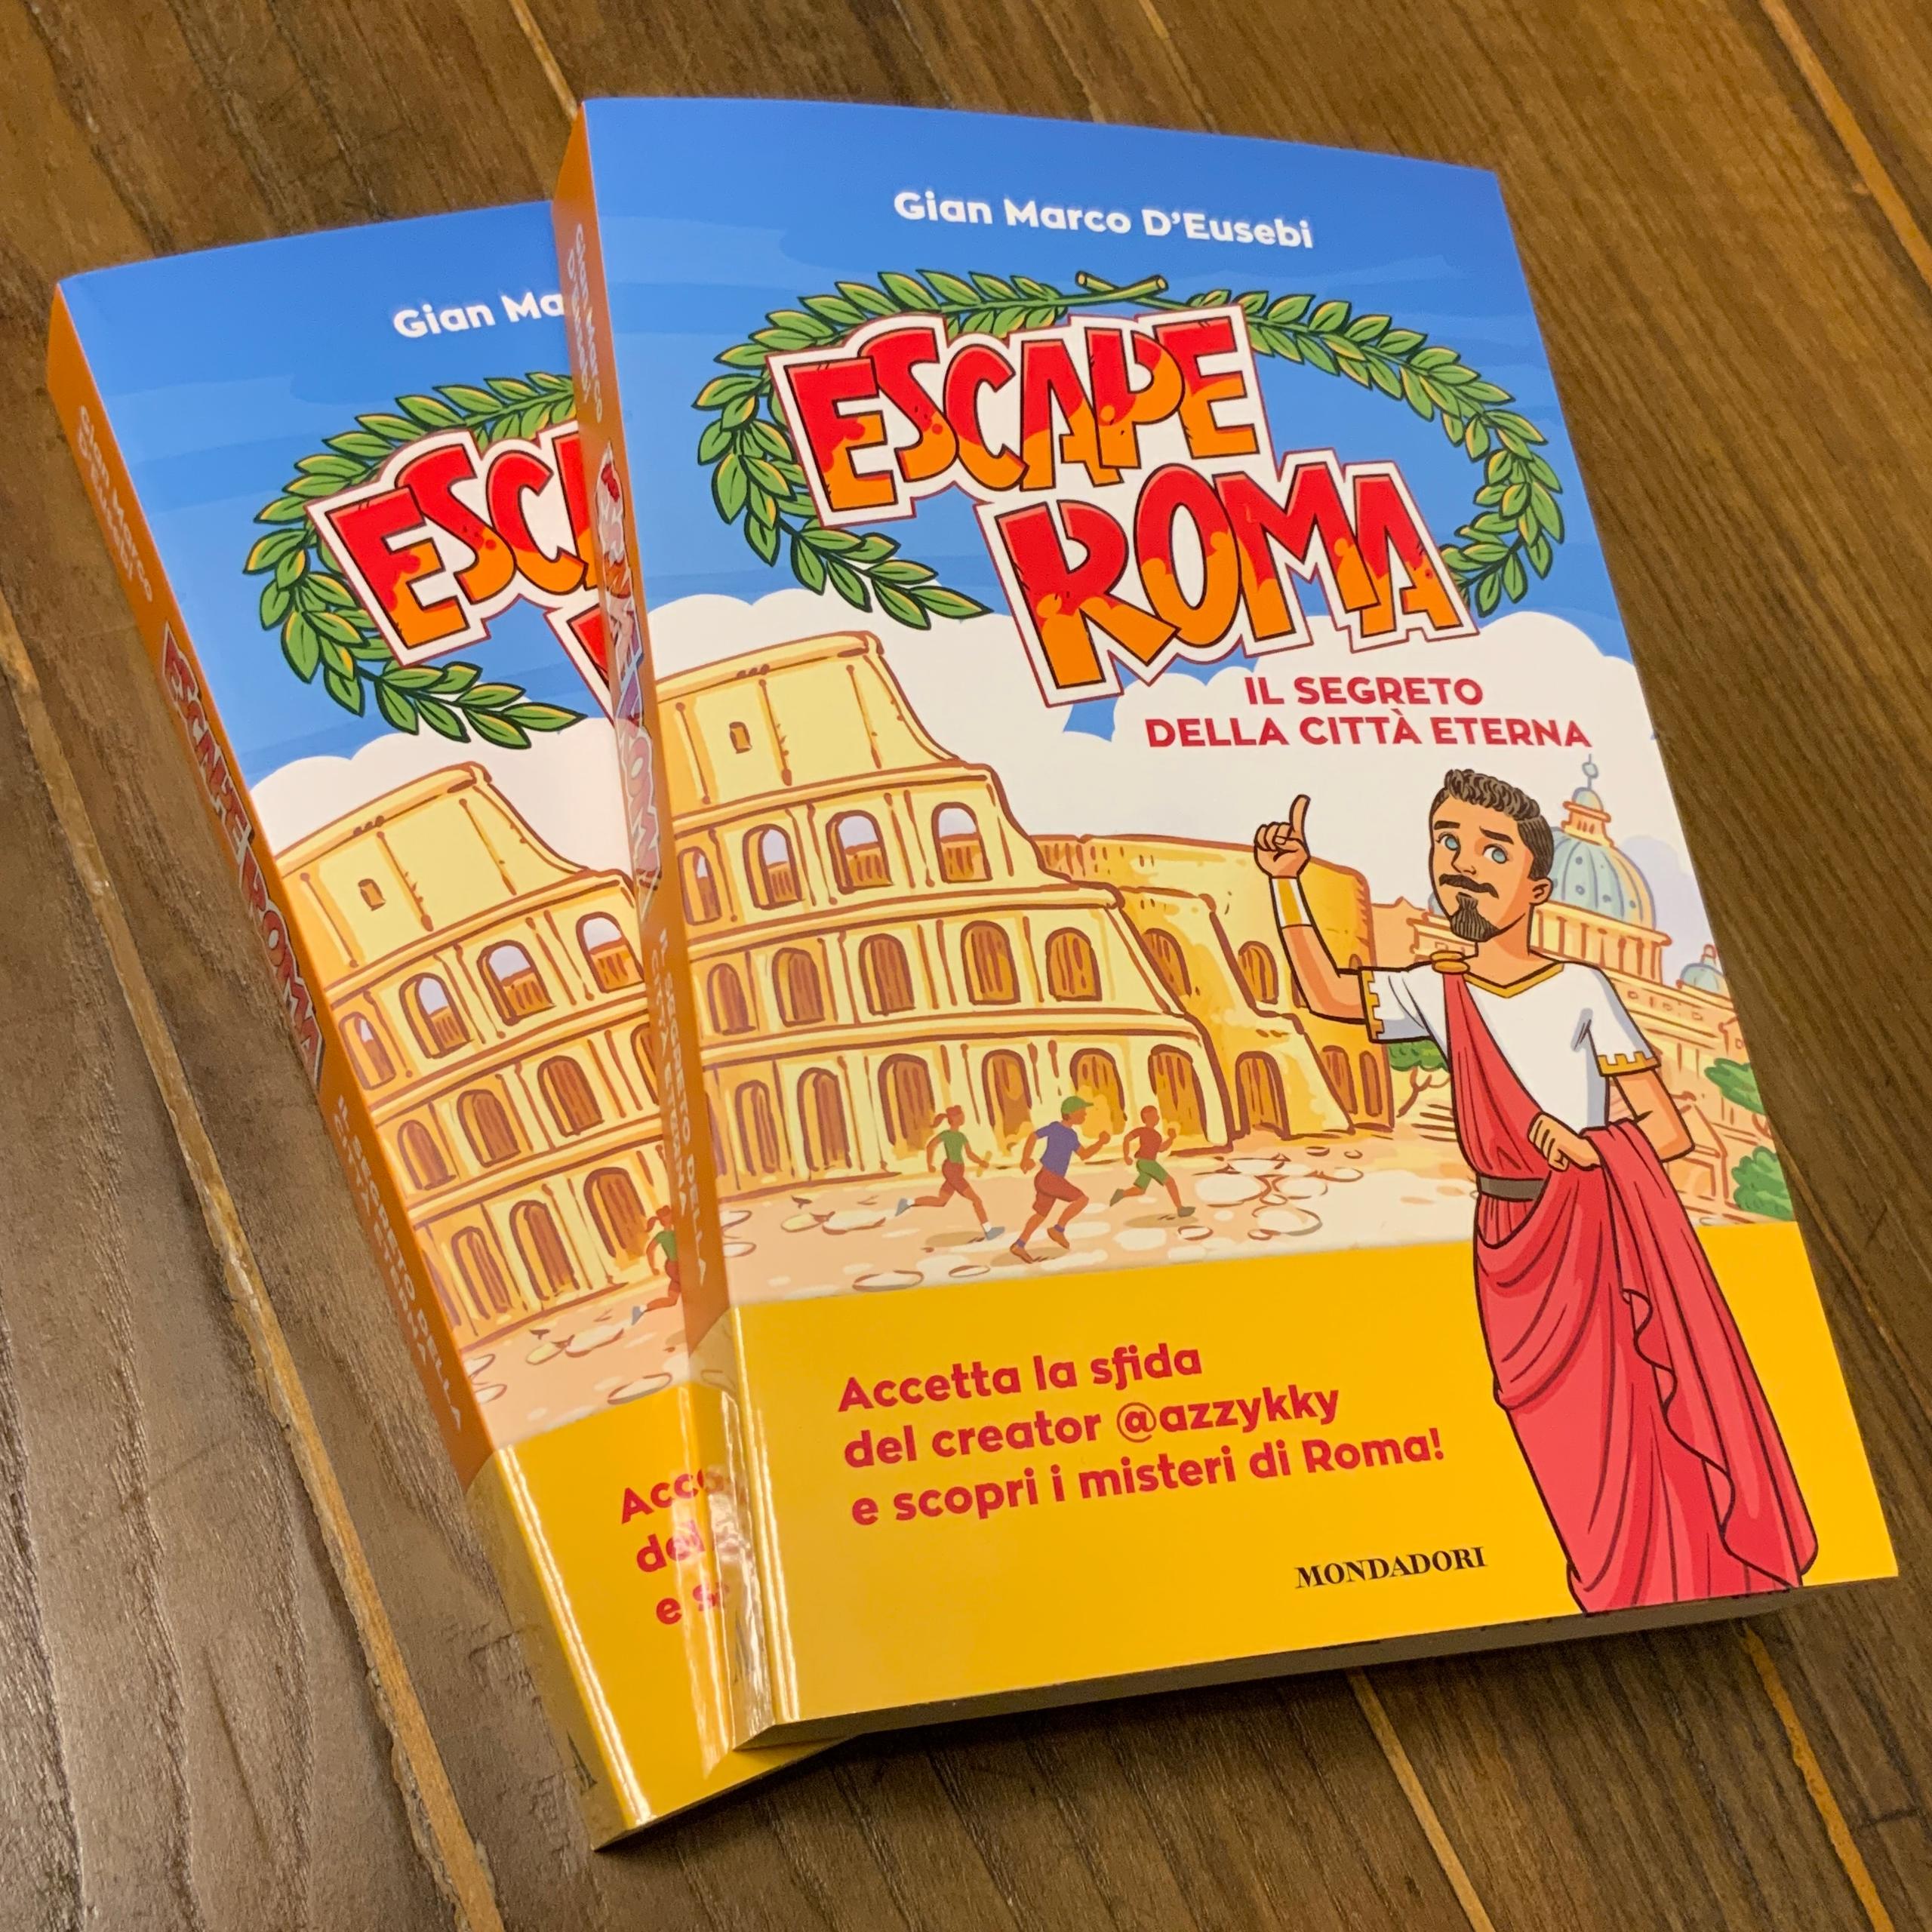 Illustrations for the children's book "Escape Roma" written by Gian Marco D'Eusebi and published by